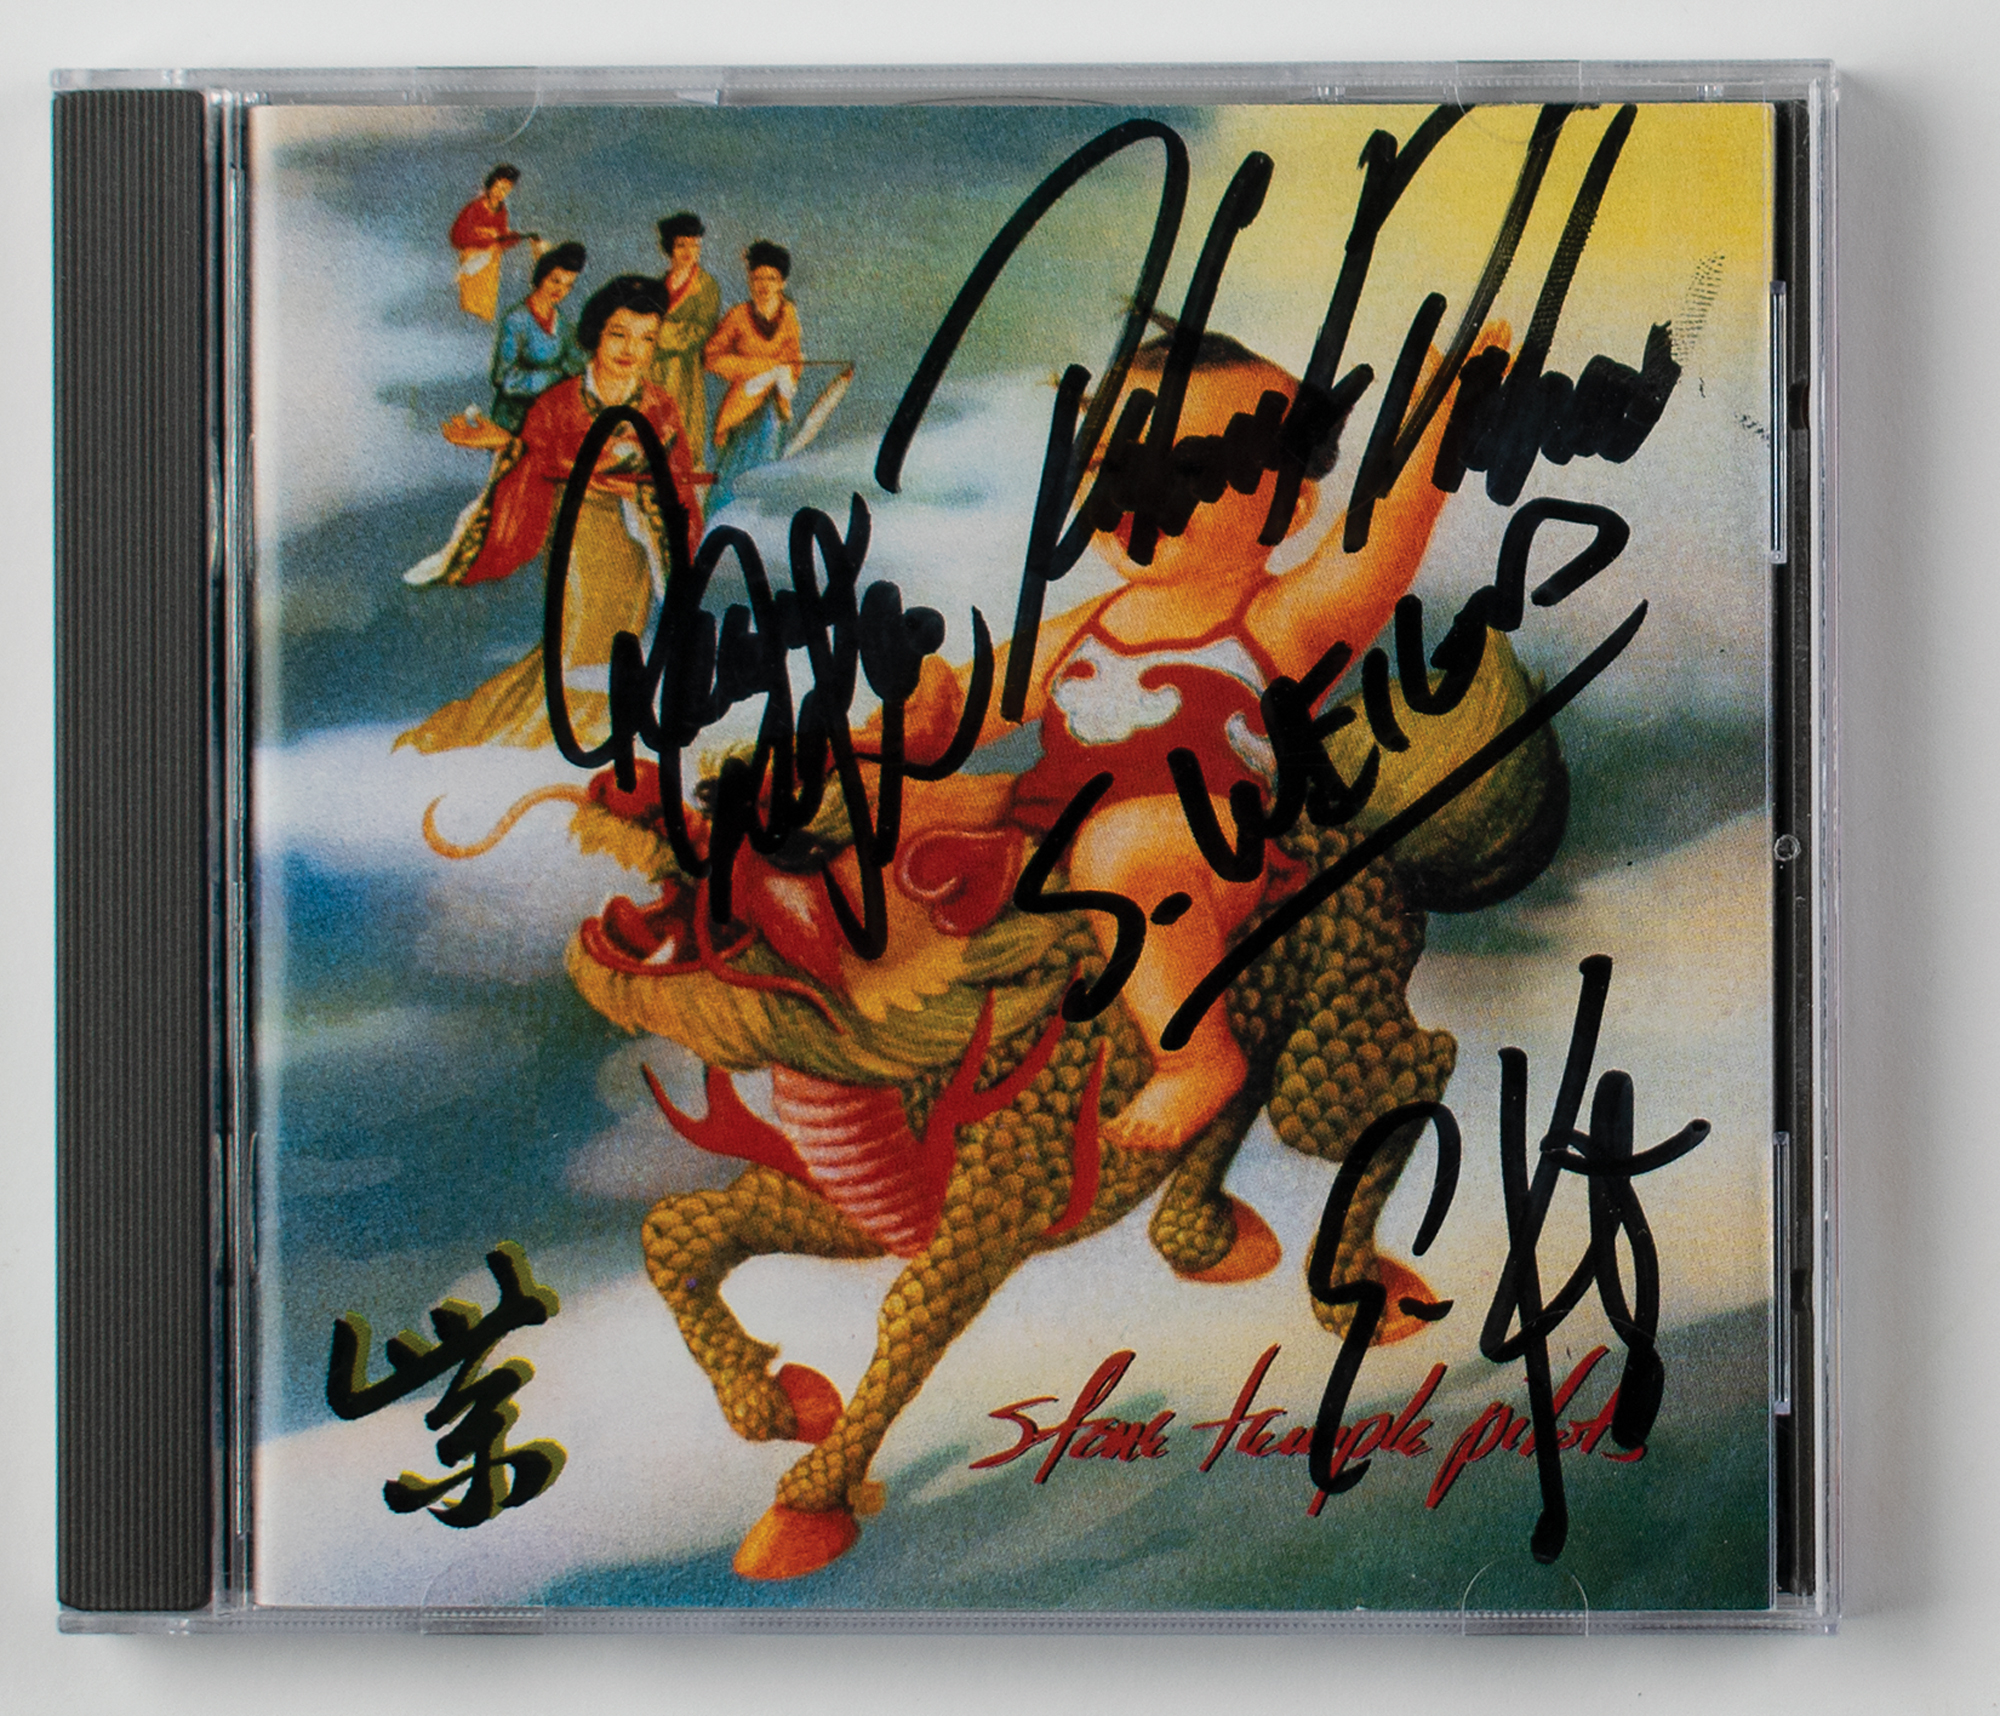 Lot #662 Stone Temple Pilots Signed CD